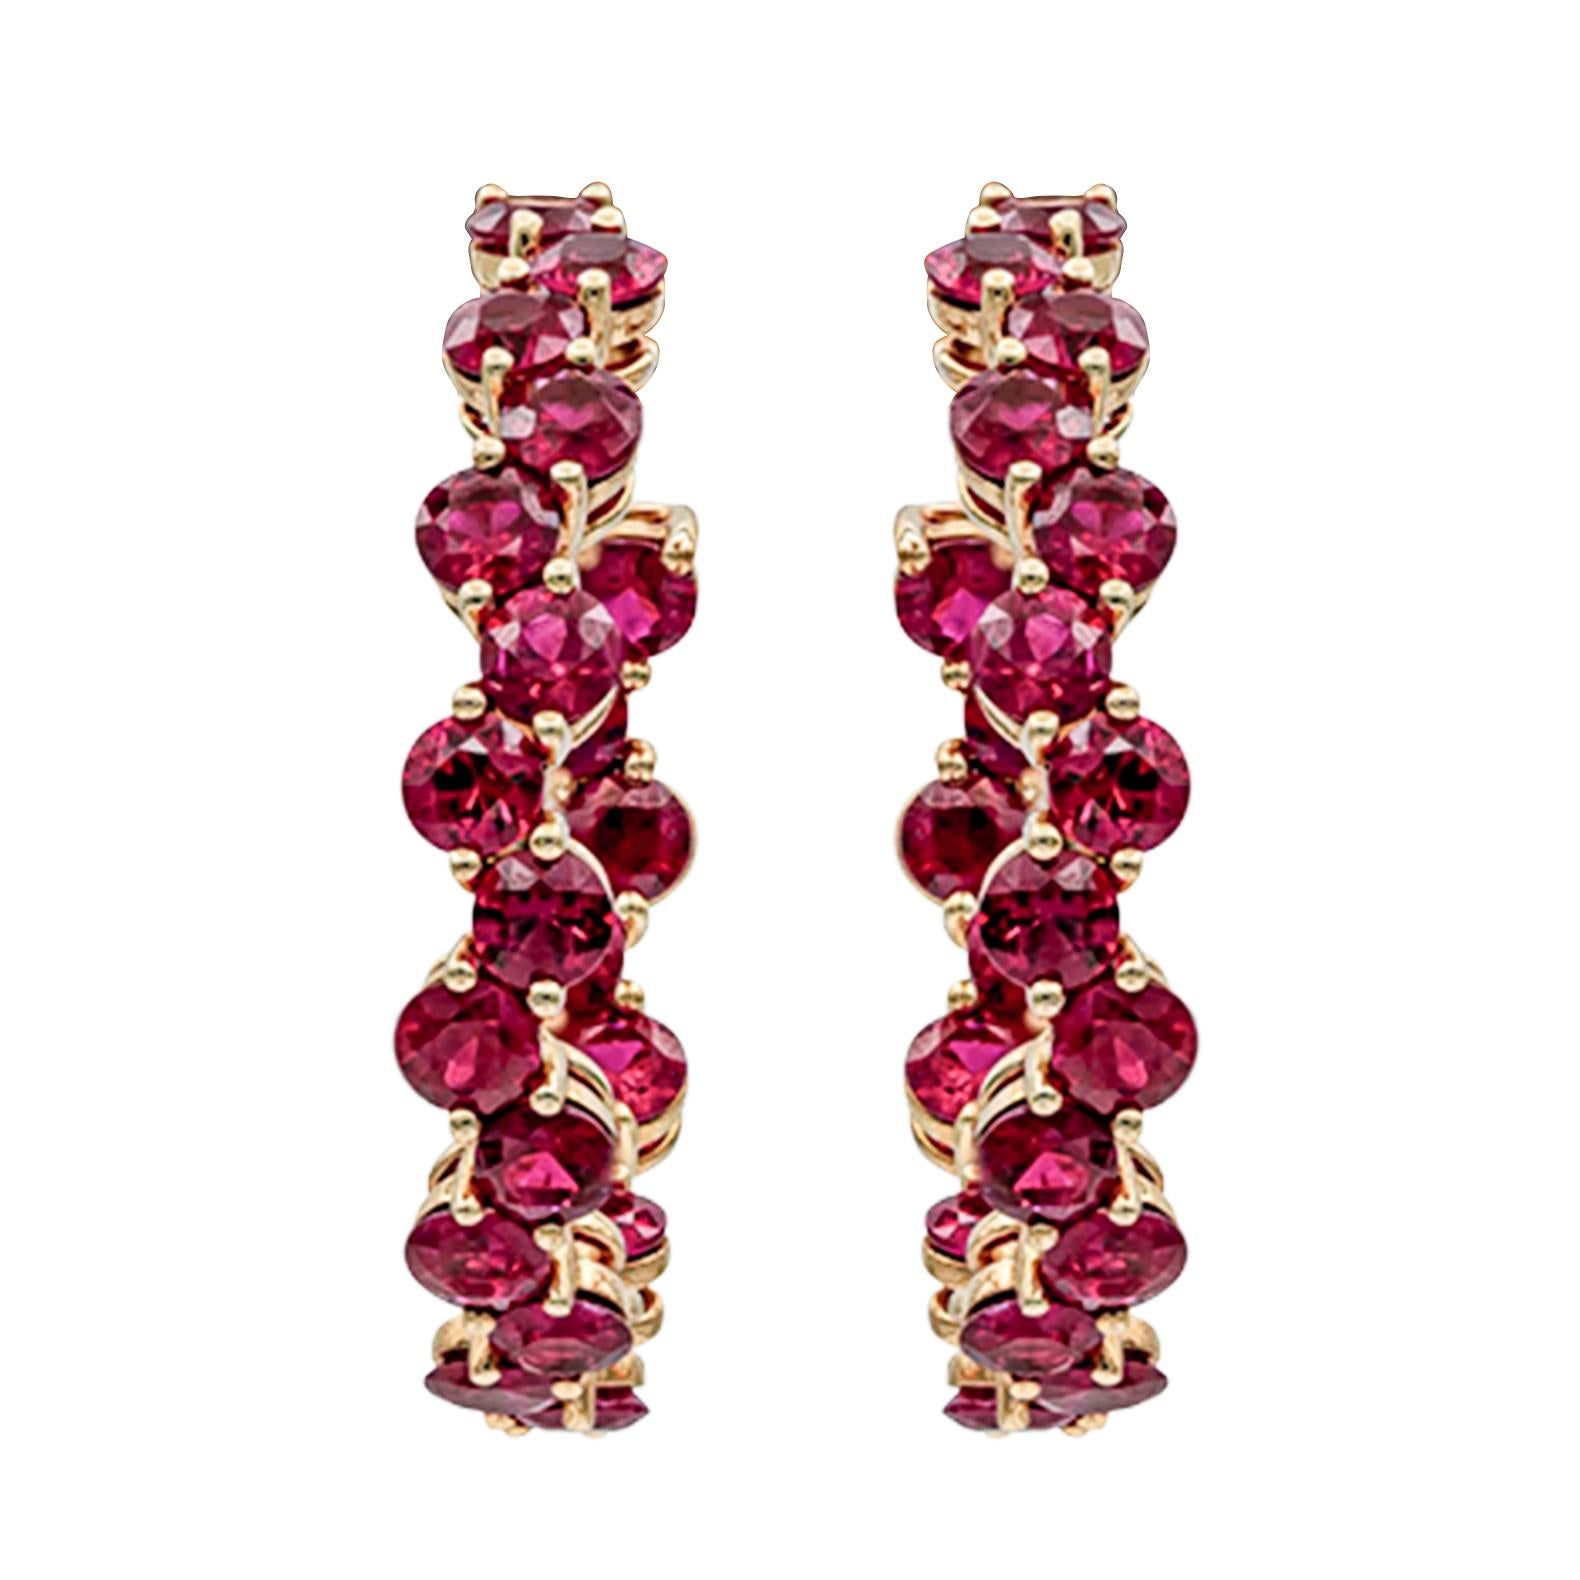 A beautiful and stunning pair of hoop earrings showcasing 44 vibrant color-rich rubies set in a wave design pattern weighing 8.11 carats total. Perfectly made in 18k rose gold.

Roman Malakov is a custom house, specializing in creating anything you